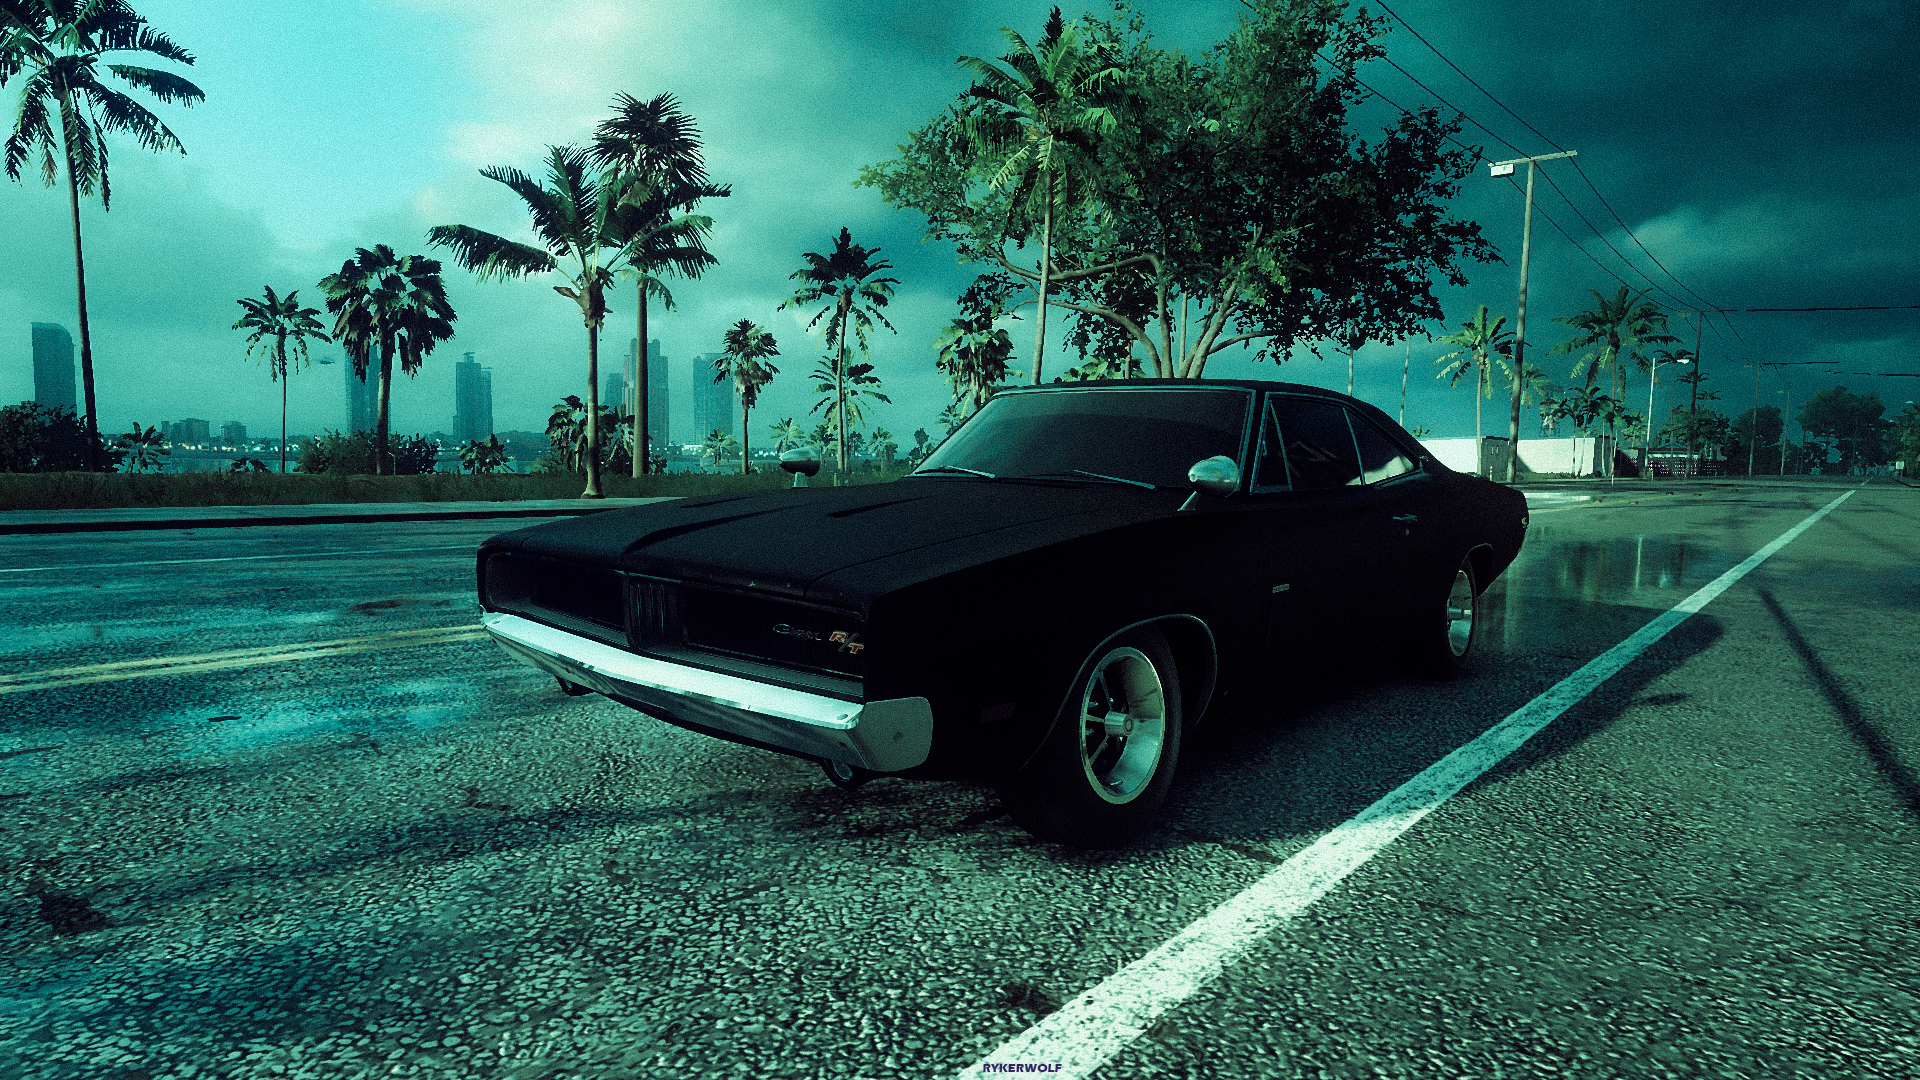 Need For Speed Need For Speed Heat Dodge Challenger Vehicle Video Games Road CGi Car 1920x1080